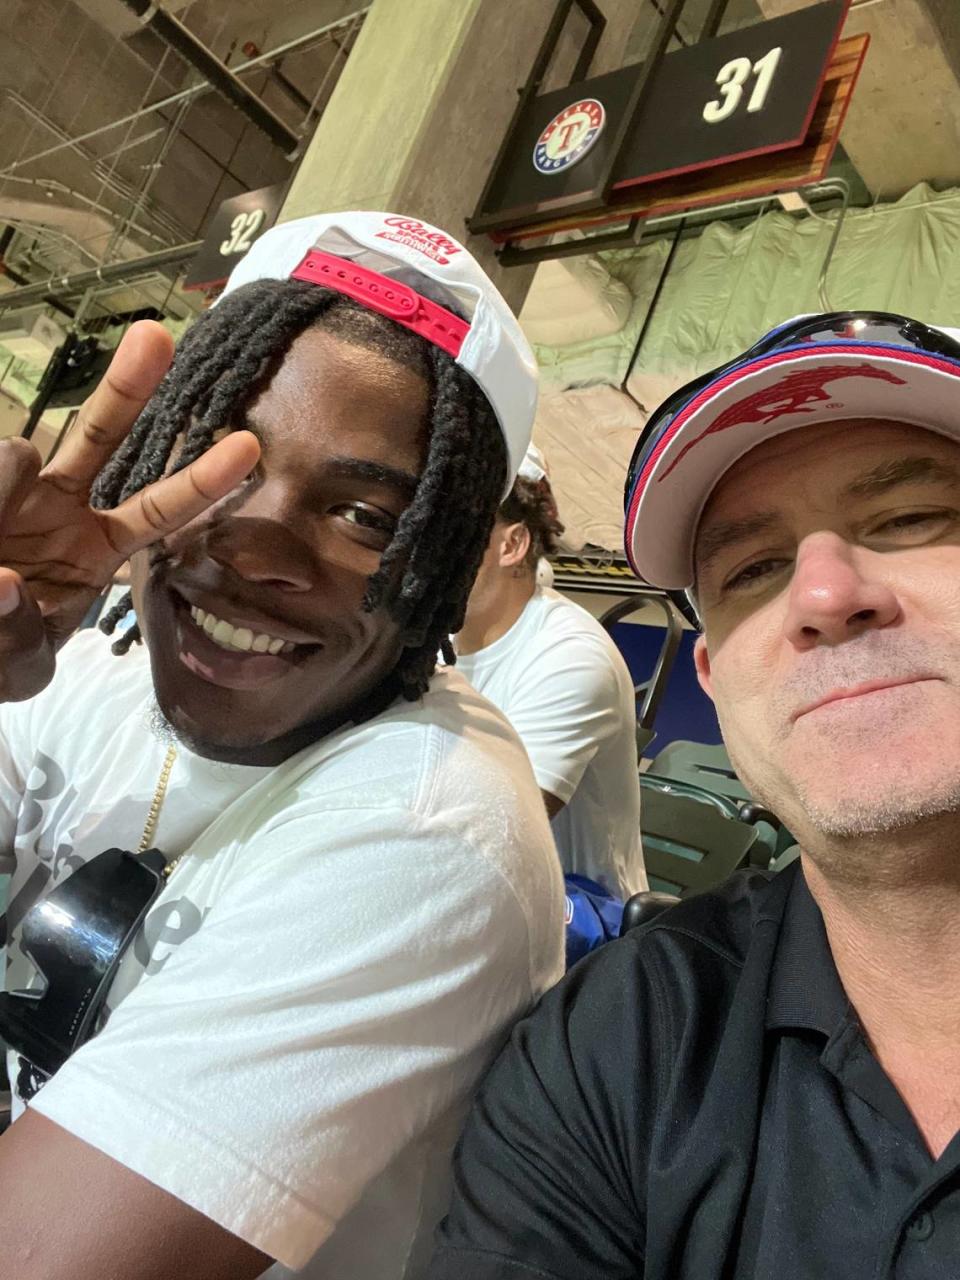 Chiefs receiver Rashee Rice, left, poses for a photo with SMU receivers coach Rob Likens during a Texas Rangers game in Arlington, Texas.